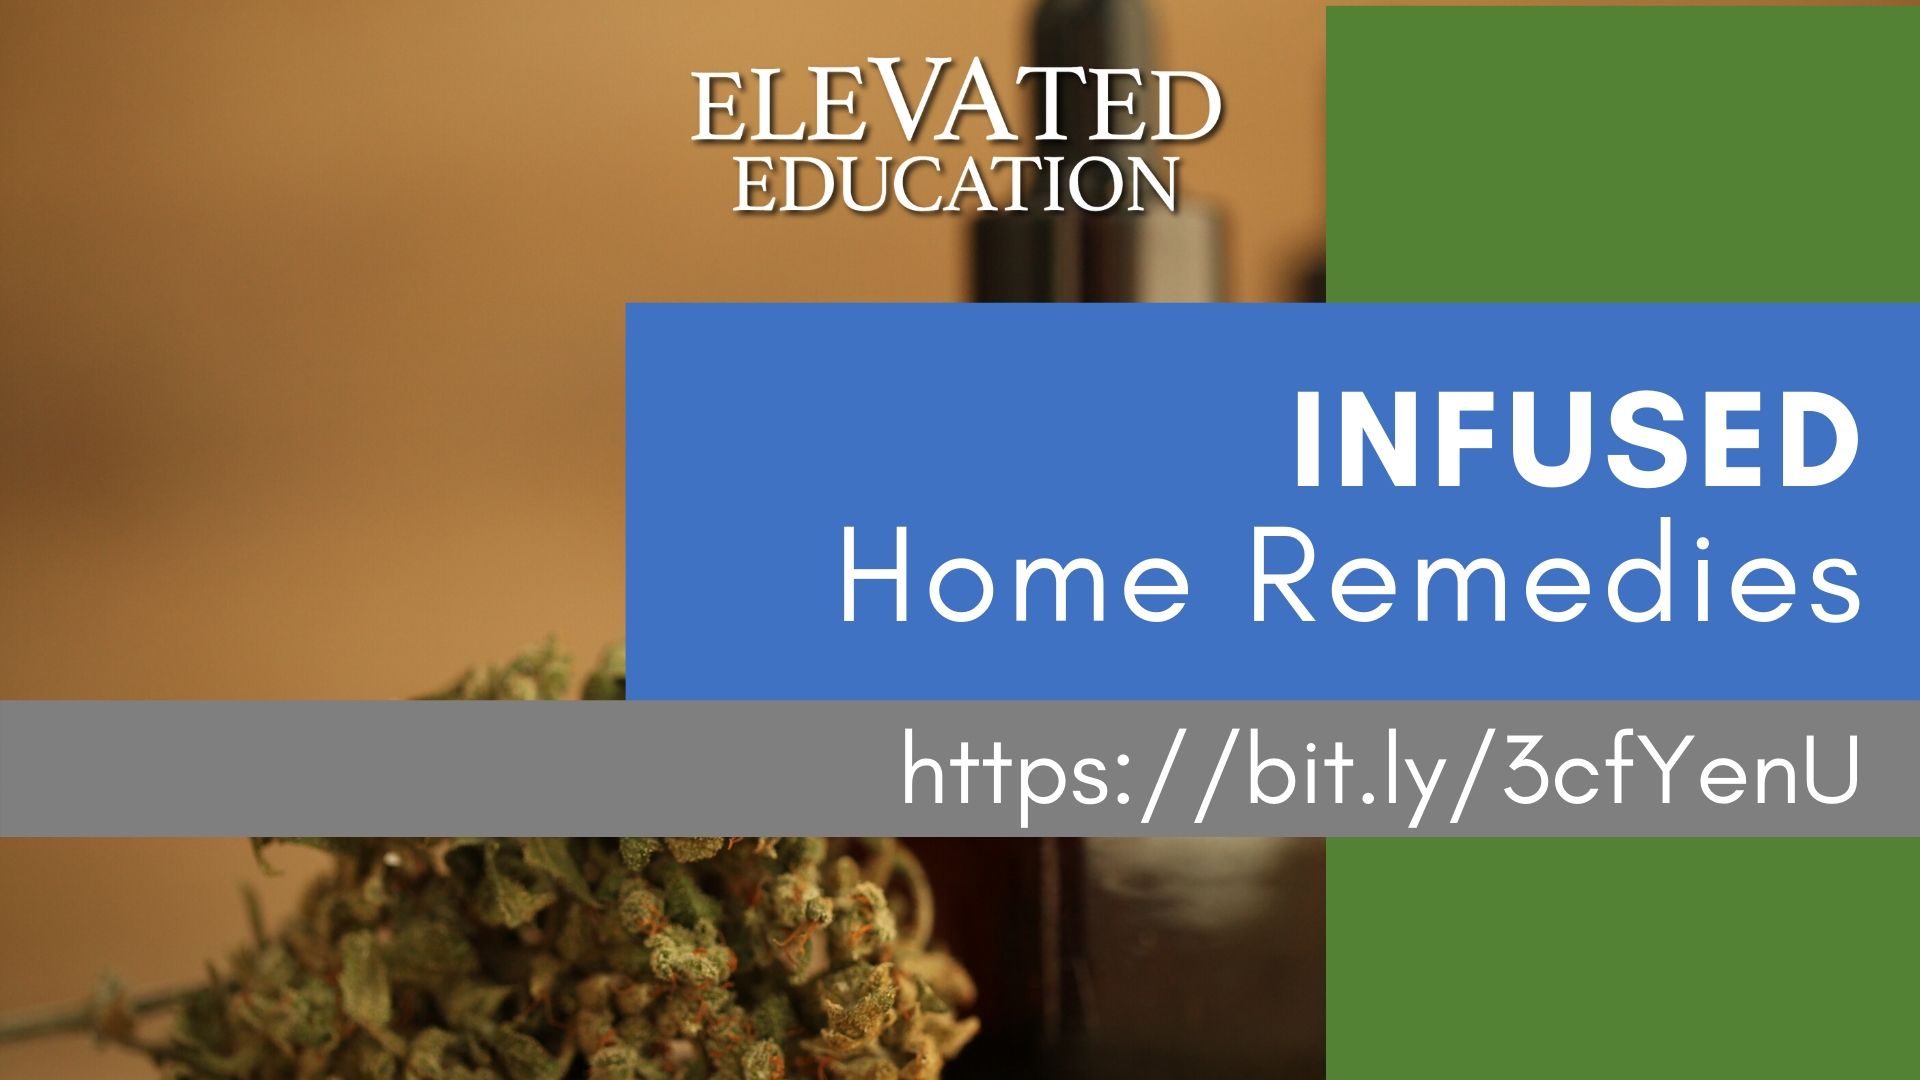 Infused Home Remedies (Elevated Education)